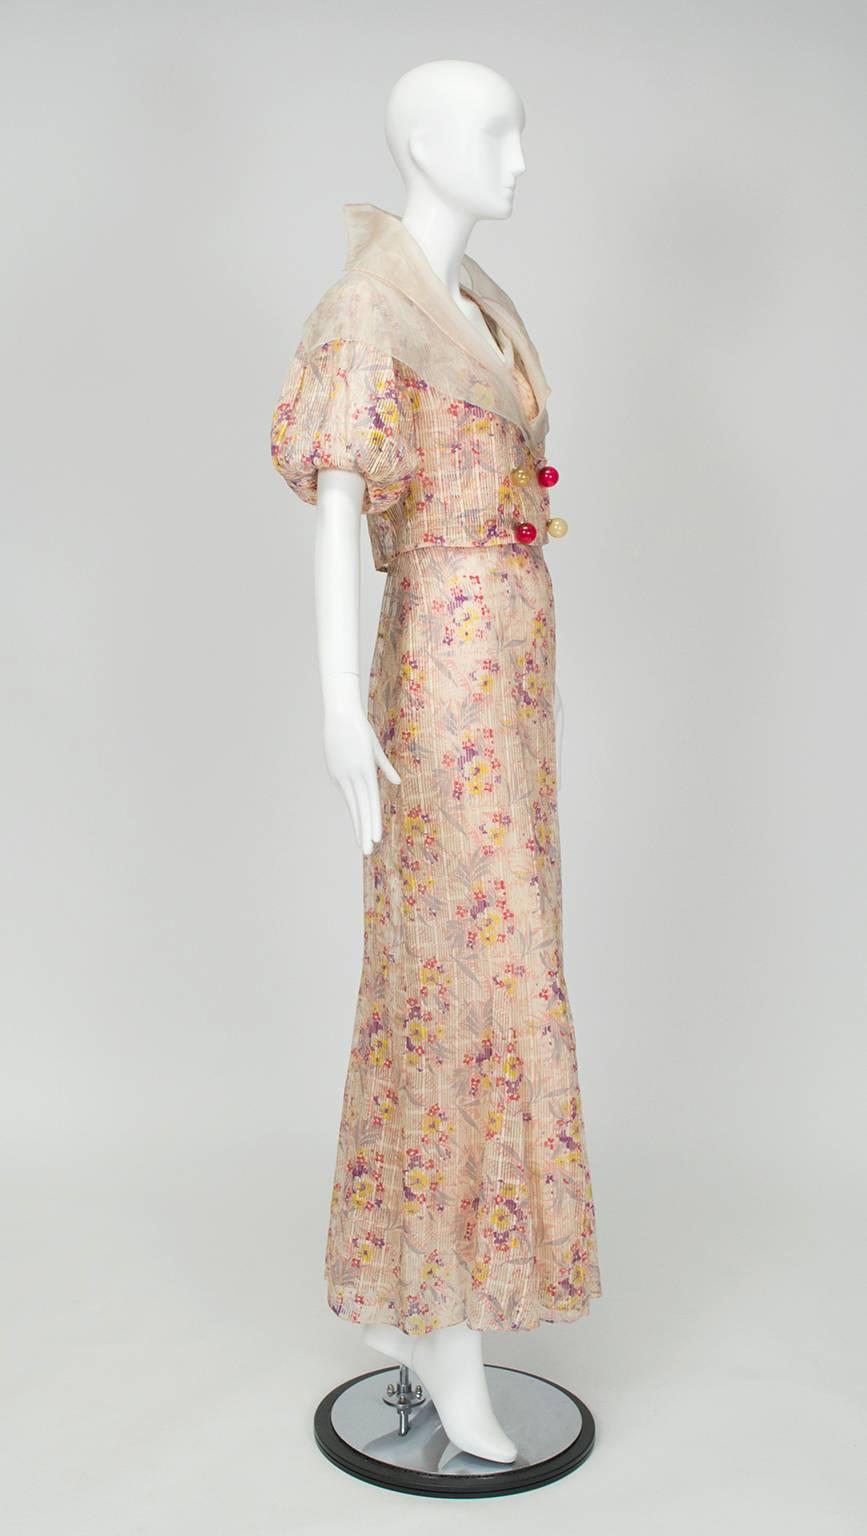 Gatsbyesque in silhouette, this gown and jacket are so lightweight they would practically appear holographic were it not for their floral pattern. The secret is the unusual fabric, which consists of alternating 1/8” ribbons of printed organza and